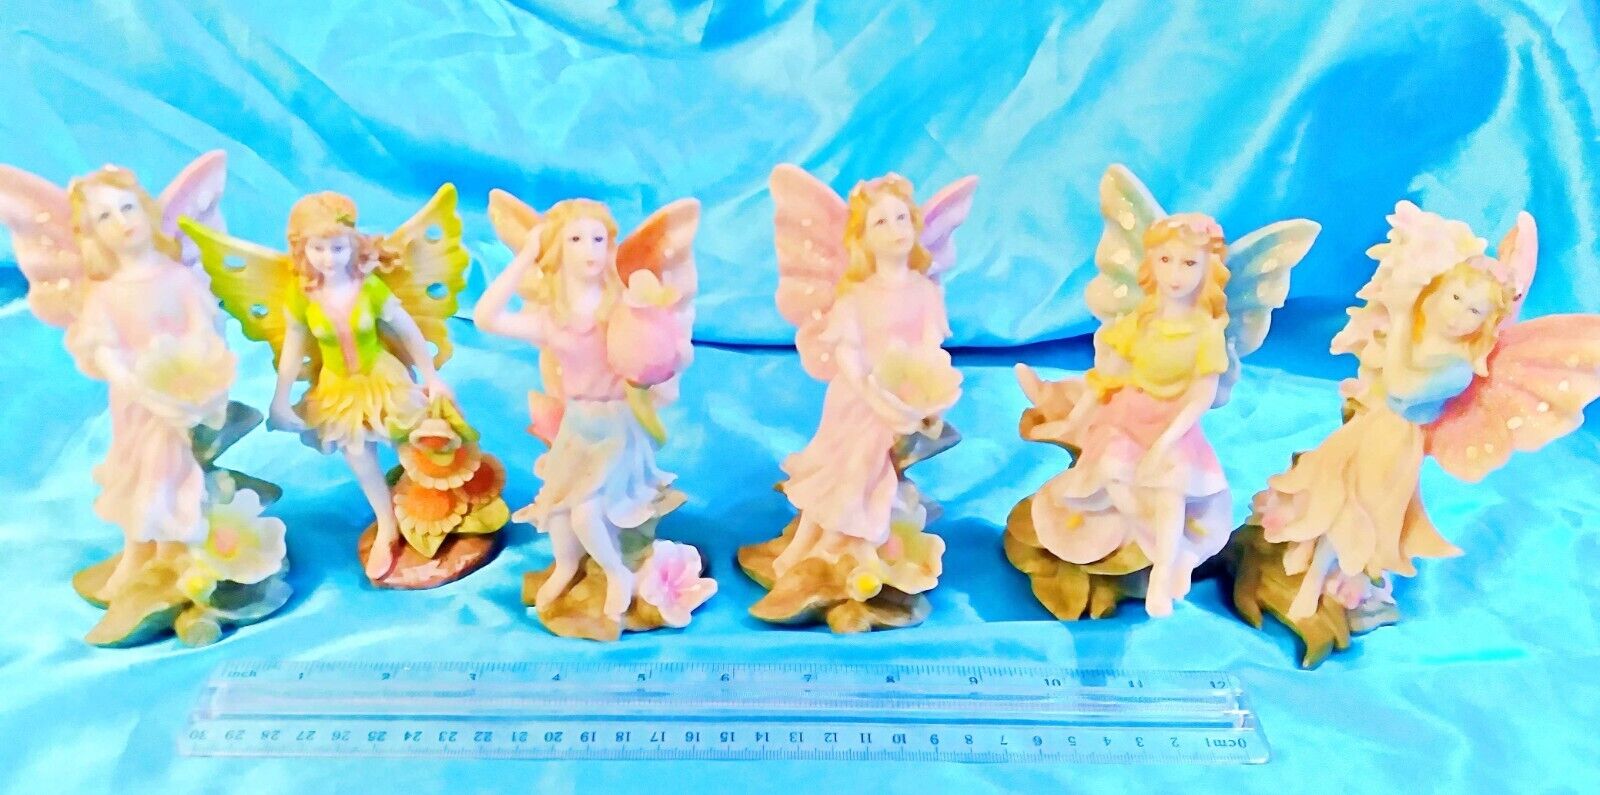 Set of 6 - BEAUTIFUL Fairy Pixie Garden Summer Fantasy Colorful Resin Figurines